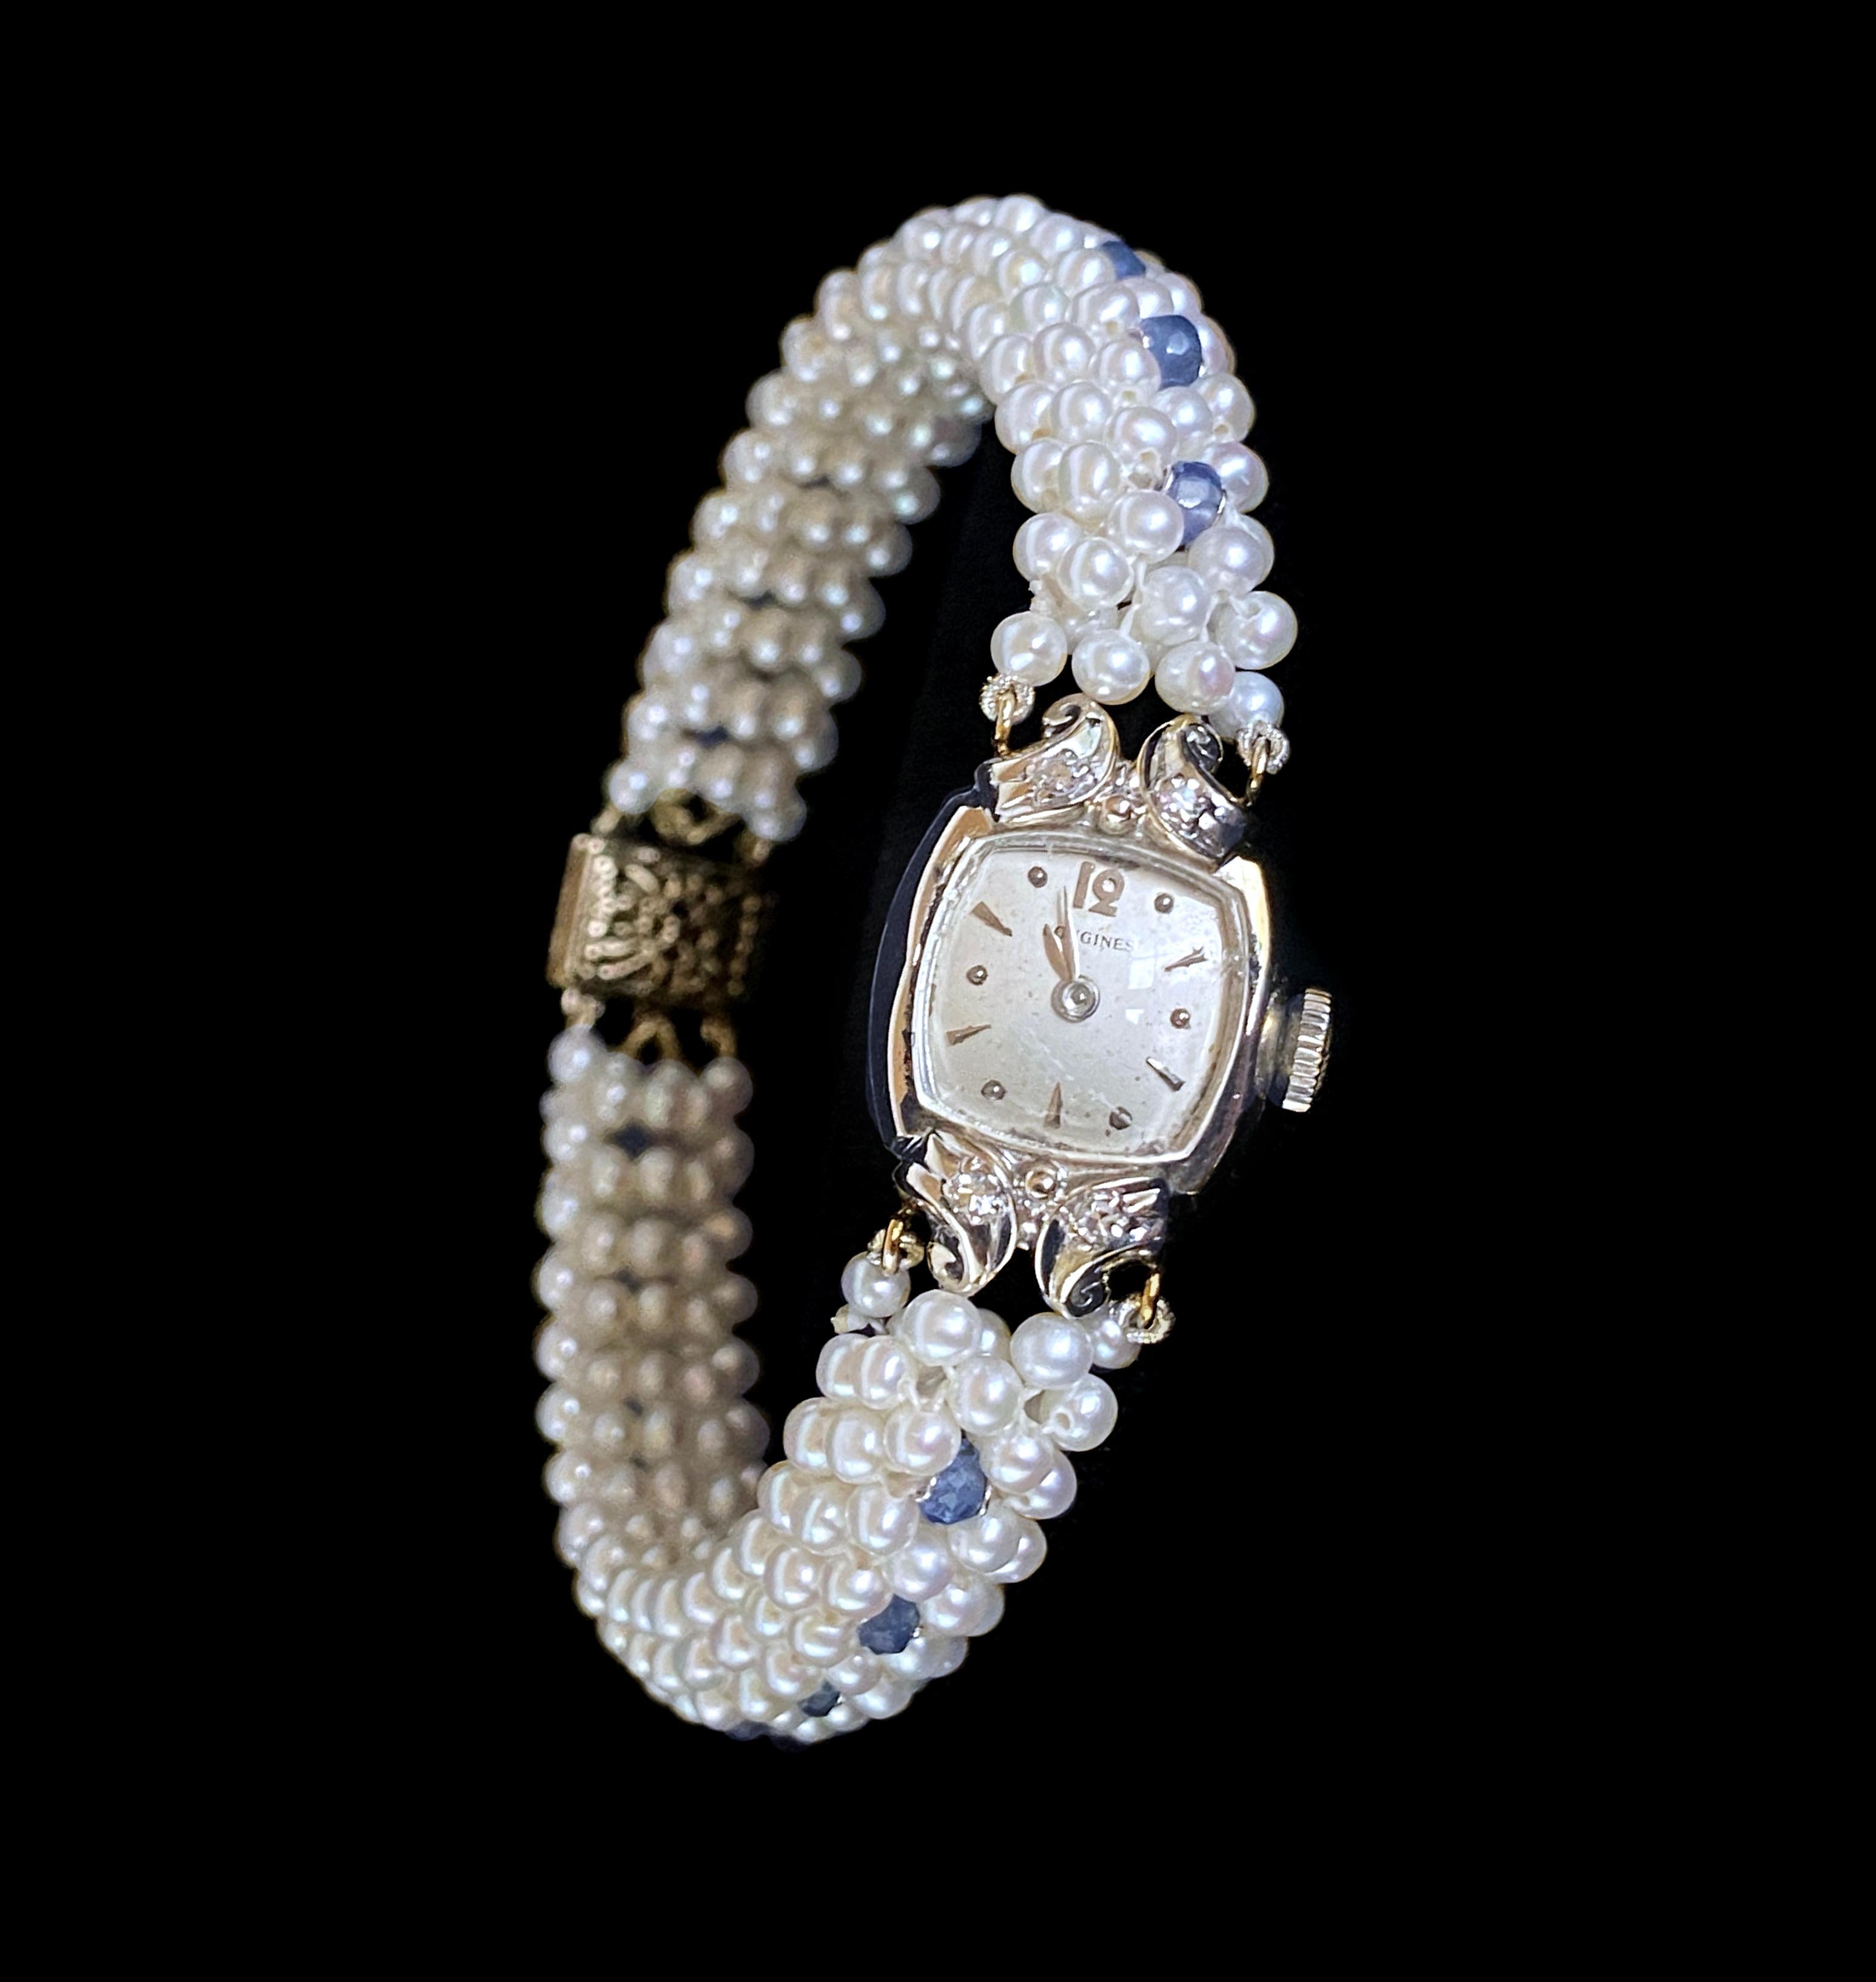 Gorgeous One of A Kind by Marina J. This piece features a stunning Antique Longines Diamond encrusted working Watch stamped 14k Gold on the back - reworked into an amazing Pearl and Blue Sapphire woven band. Watch includes its original 4 Cushion cut